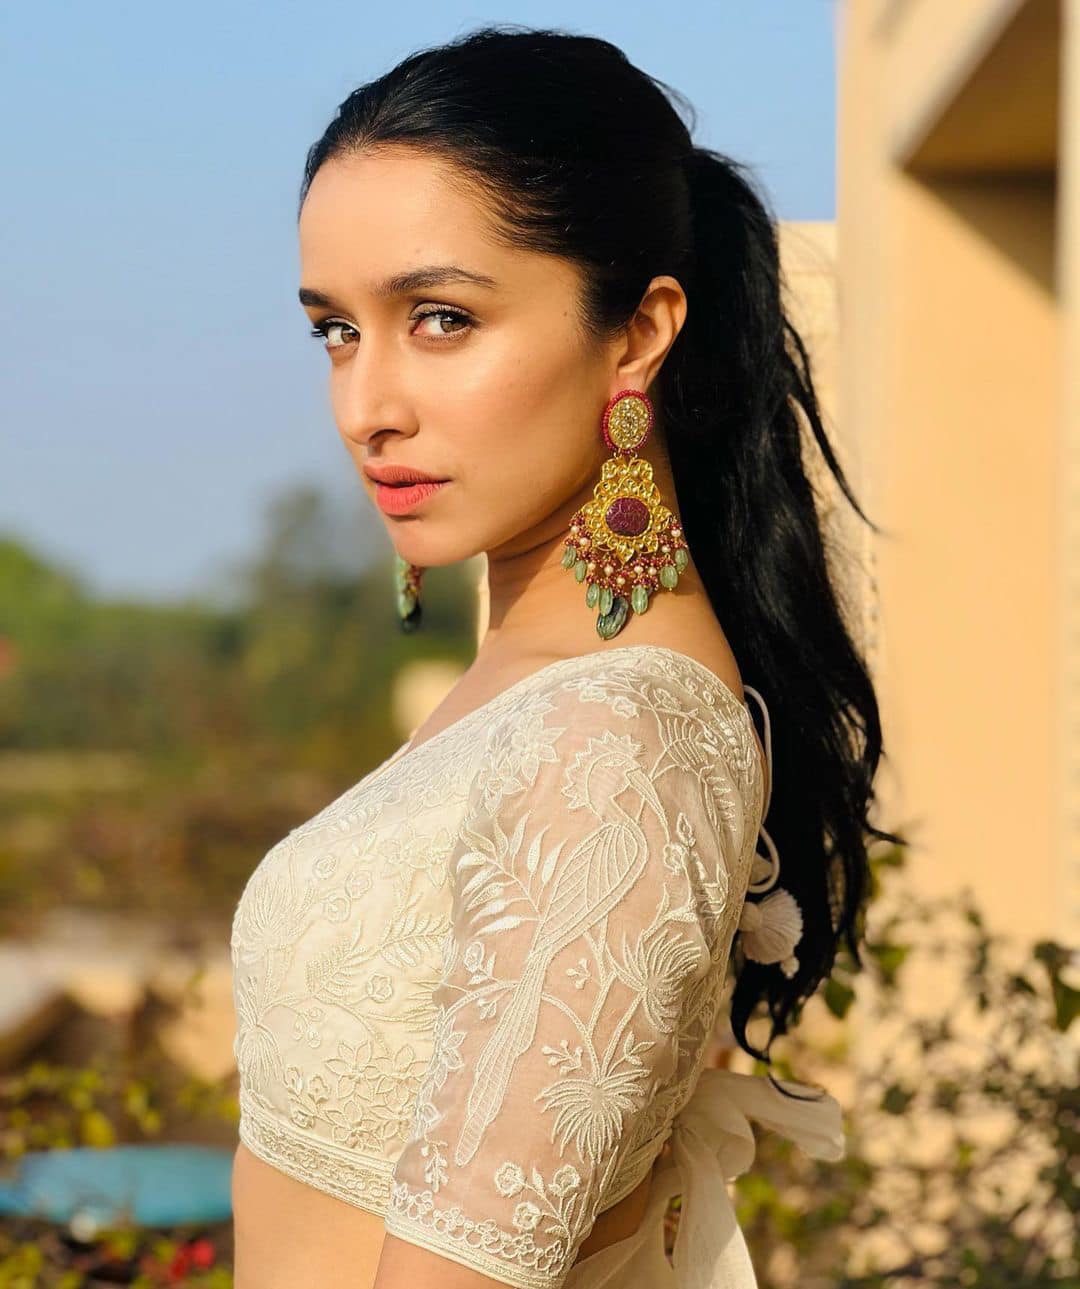 Shraddha Kapoor: Biography, Age, Height, Education, Family, Career, Relationship & more.